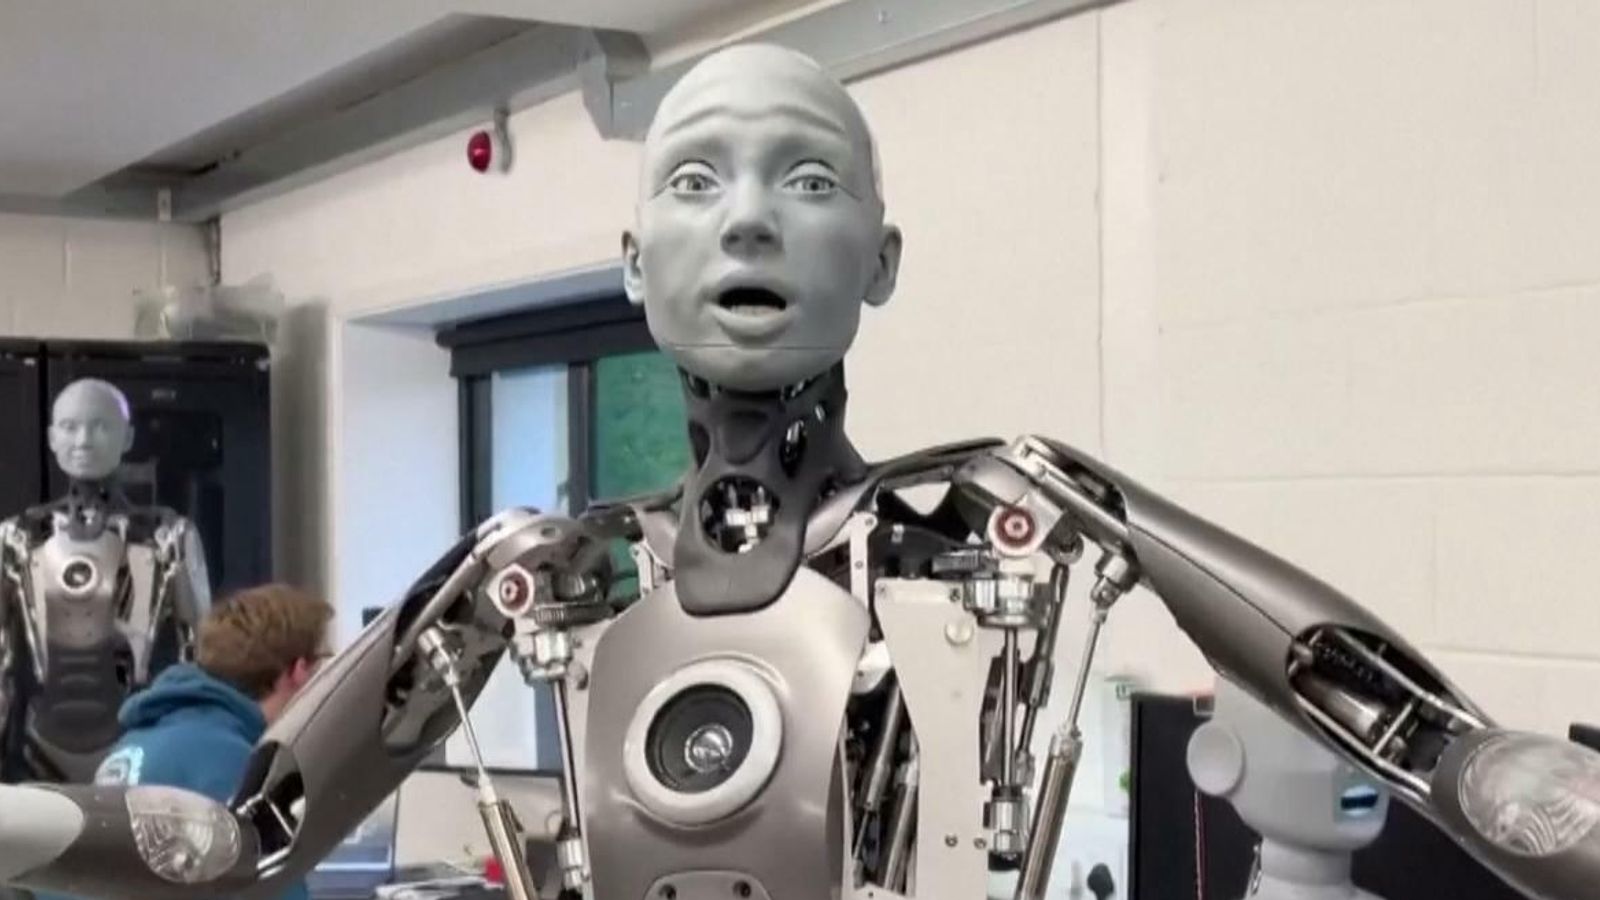 Video: £100k Robot displays life-like facial expressions and ...